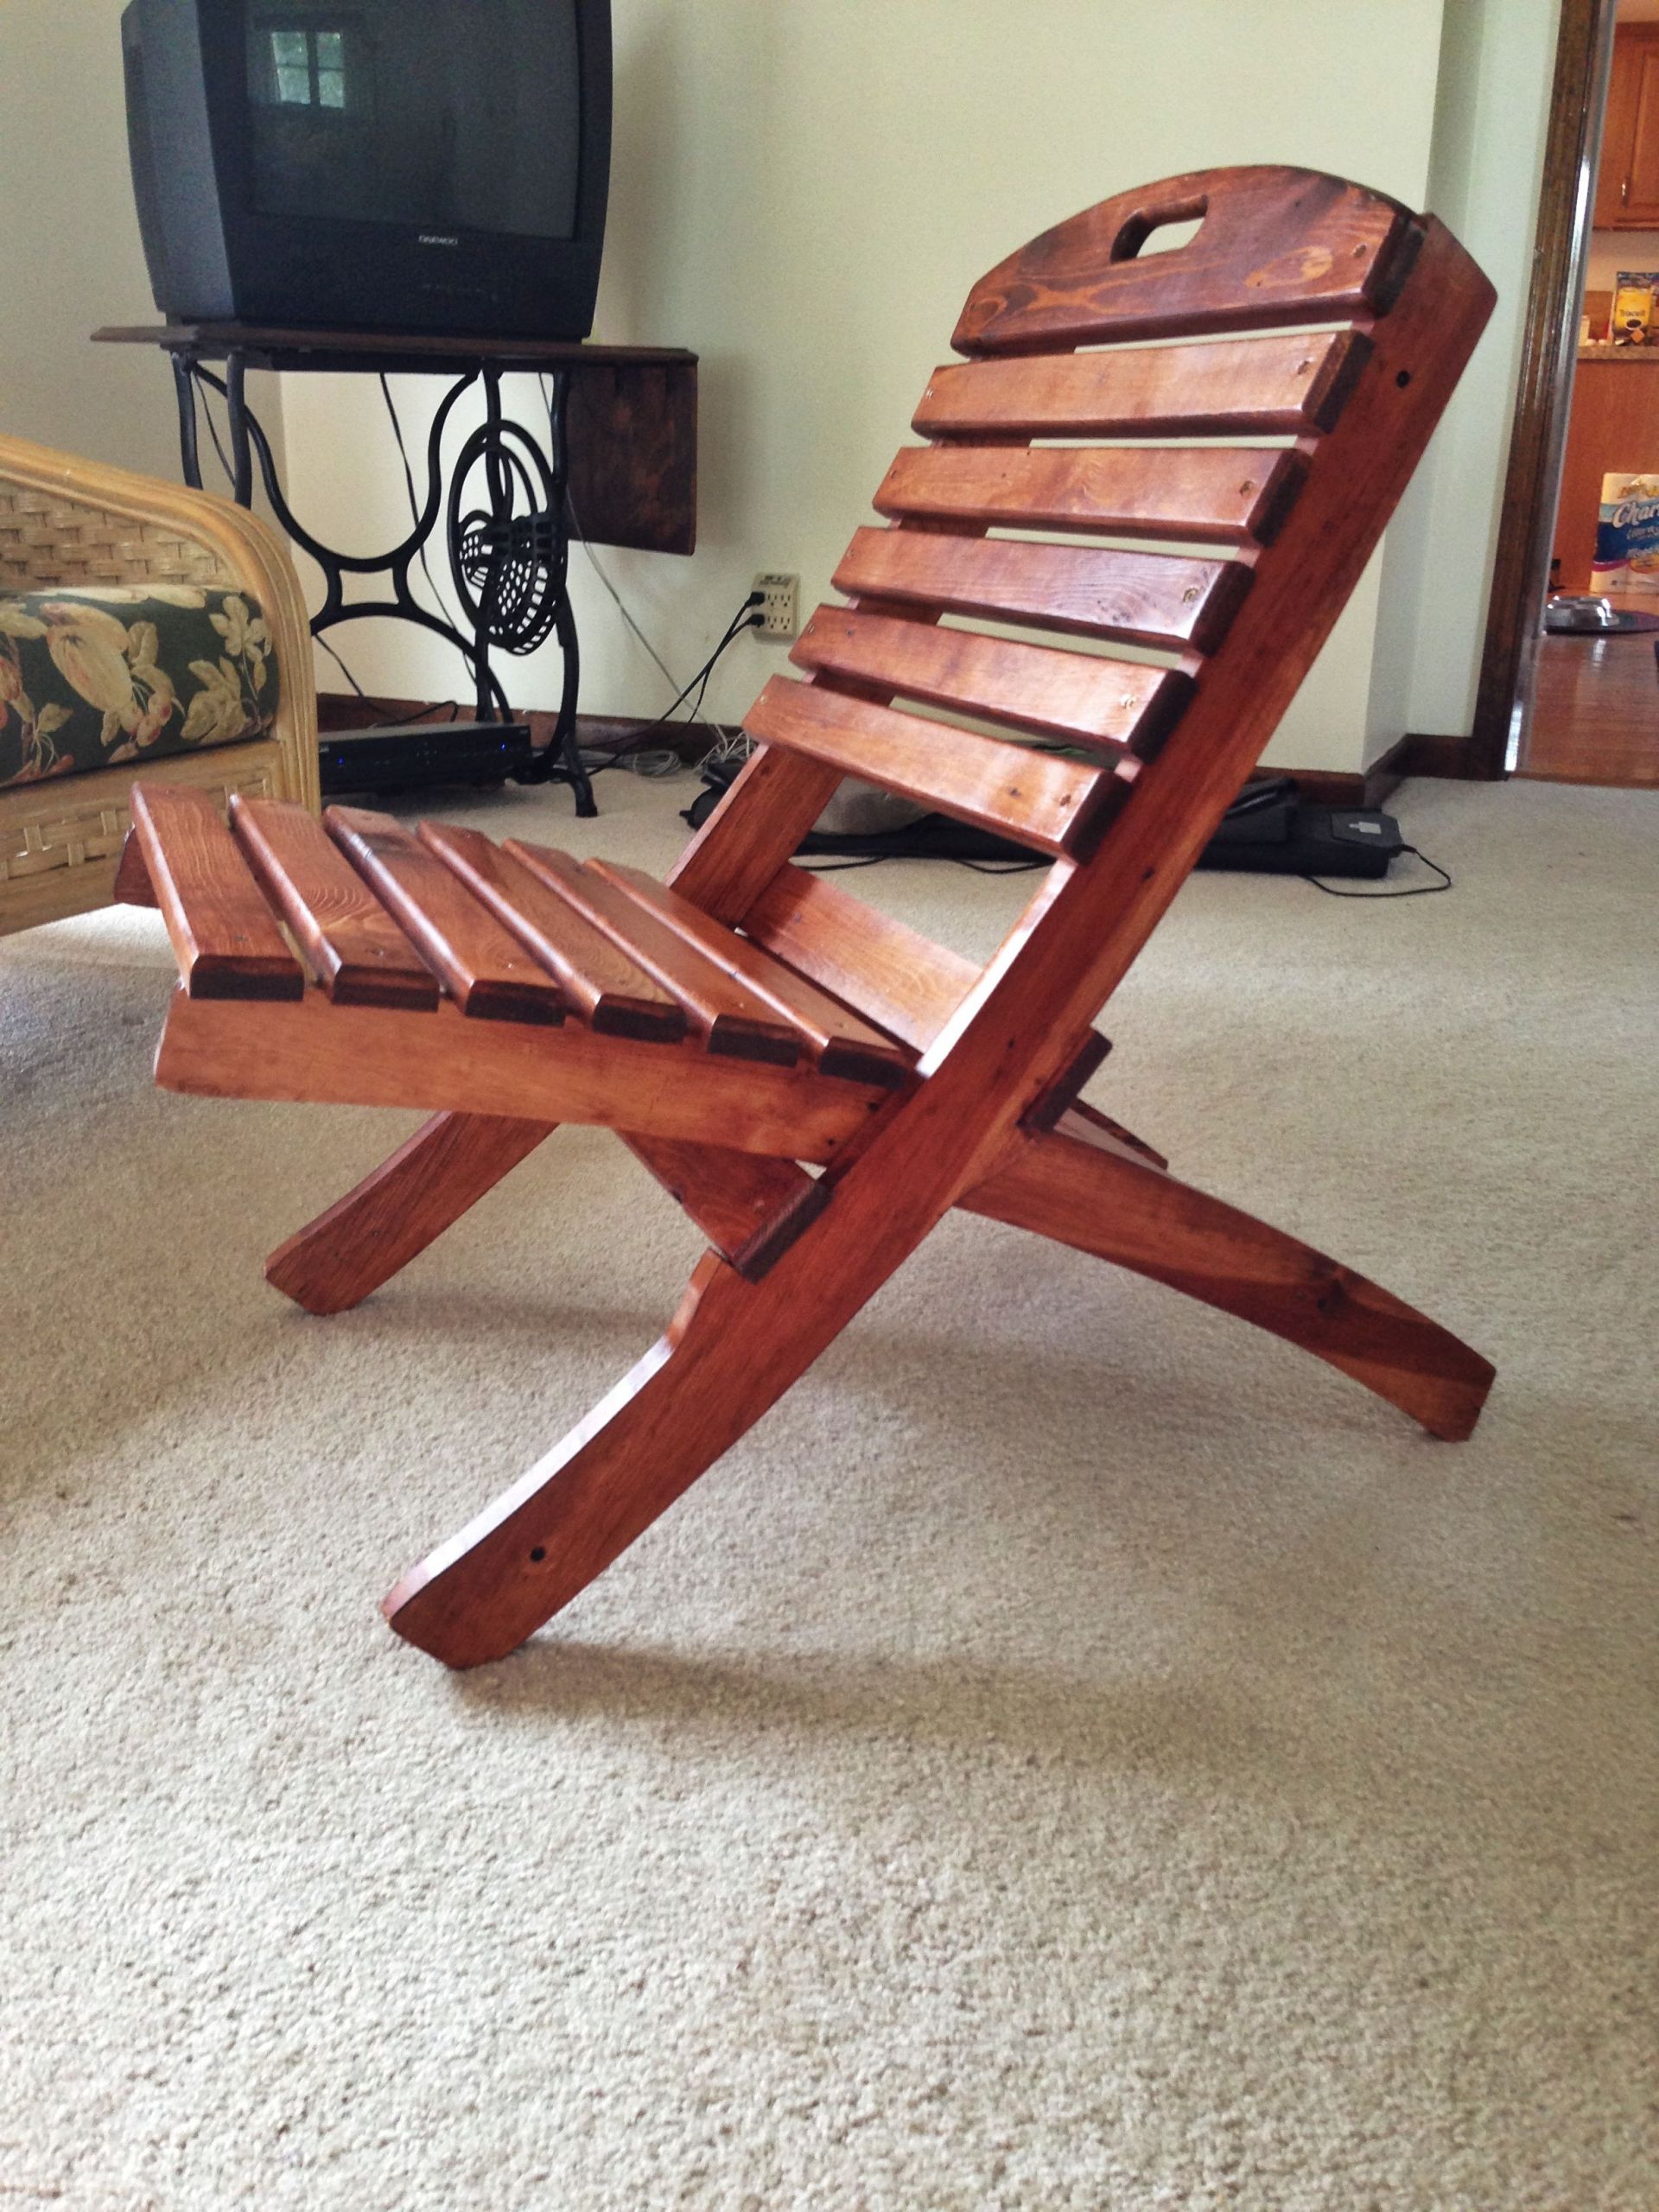 DIY Wood Chair Plans
 DIY folding chair This chair is made out of a shipping